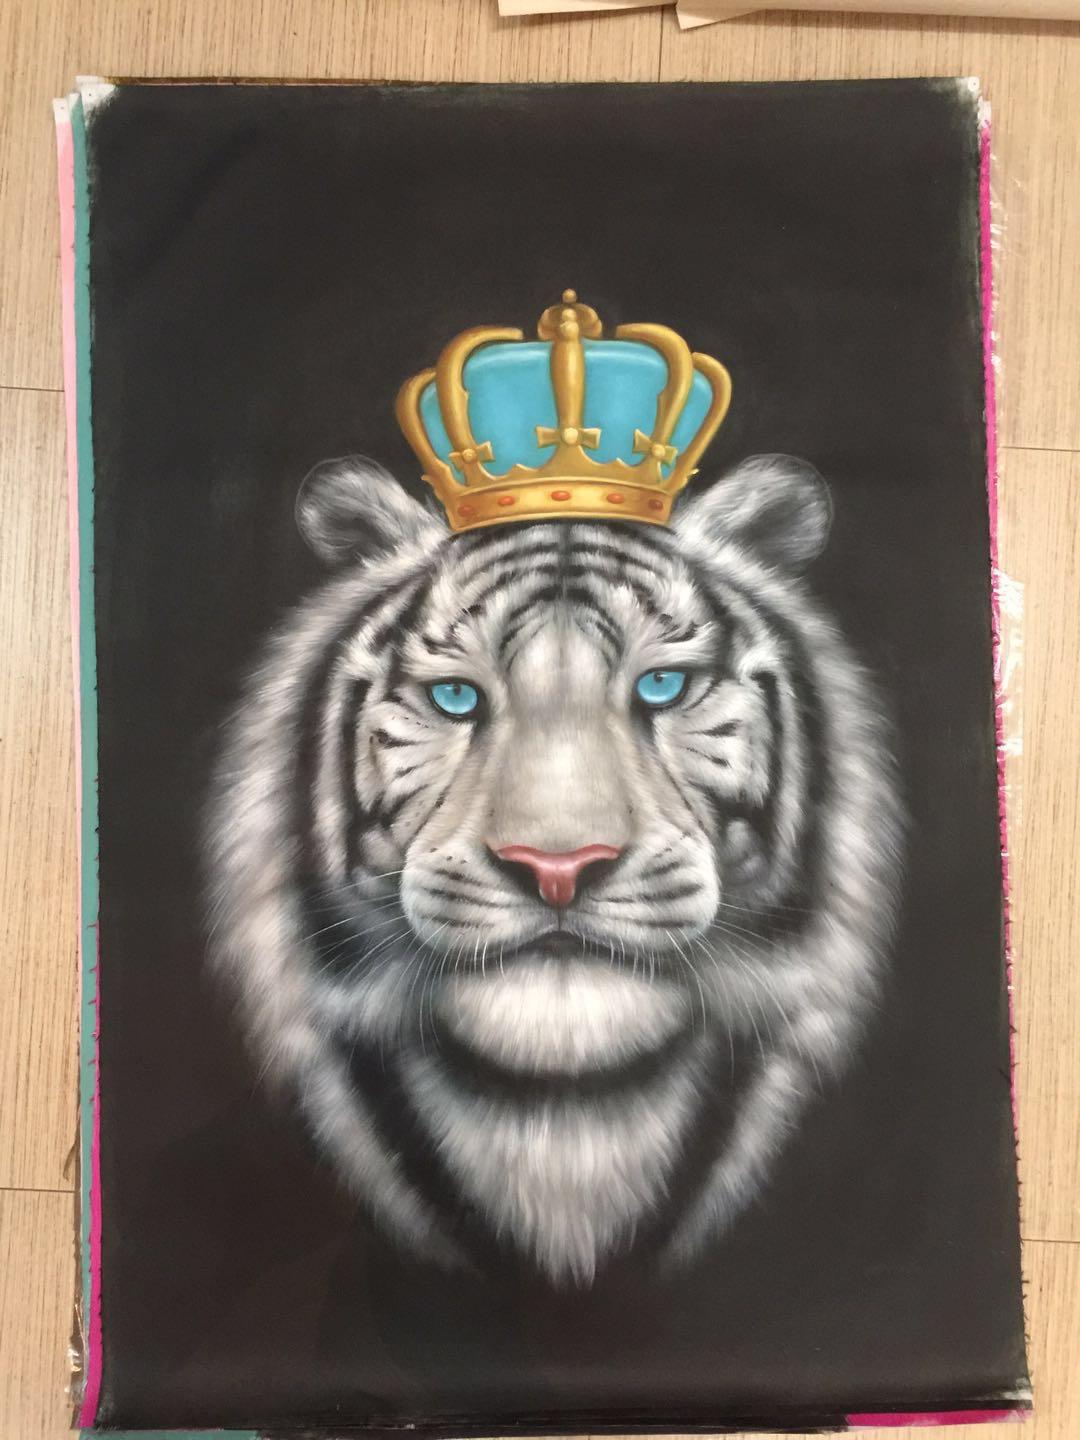 The Tiger King l - Painting by Y.m.Lo